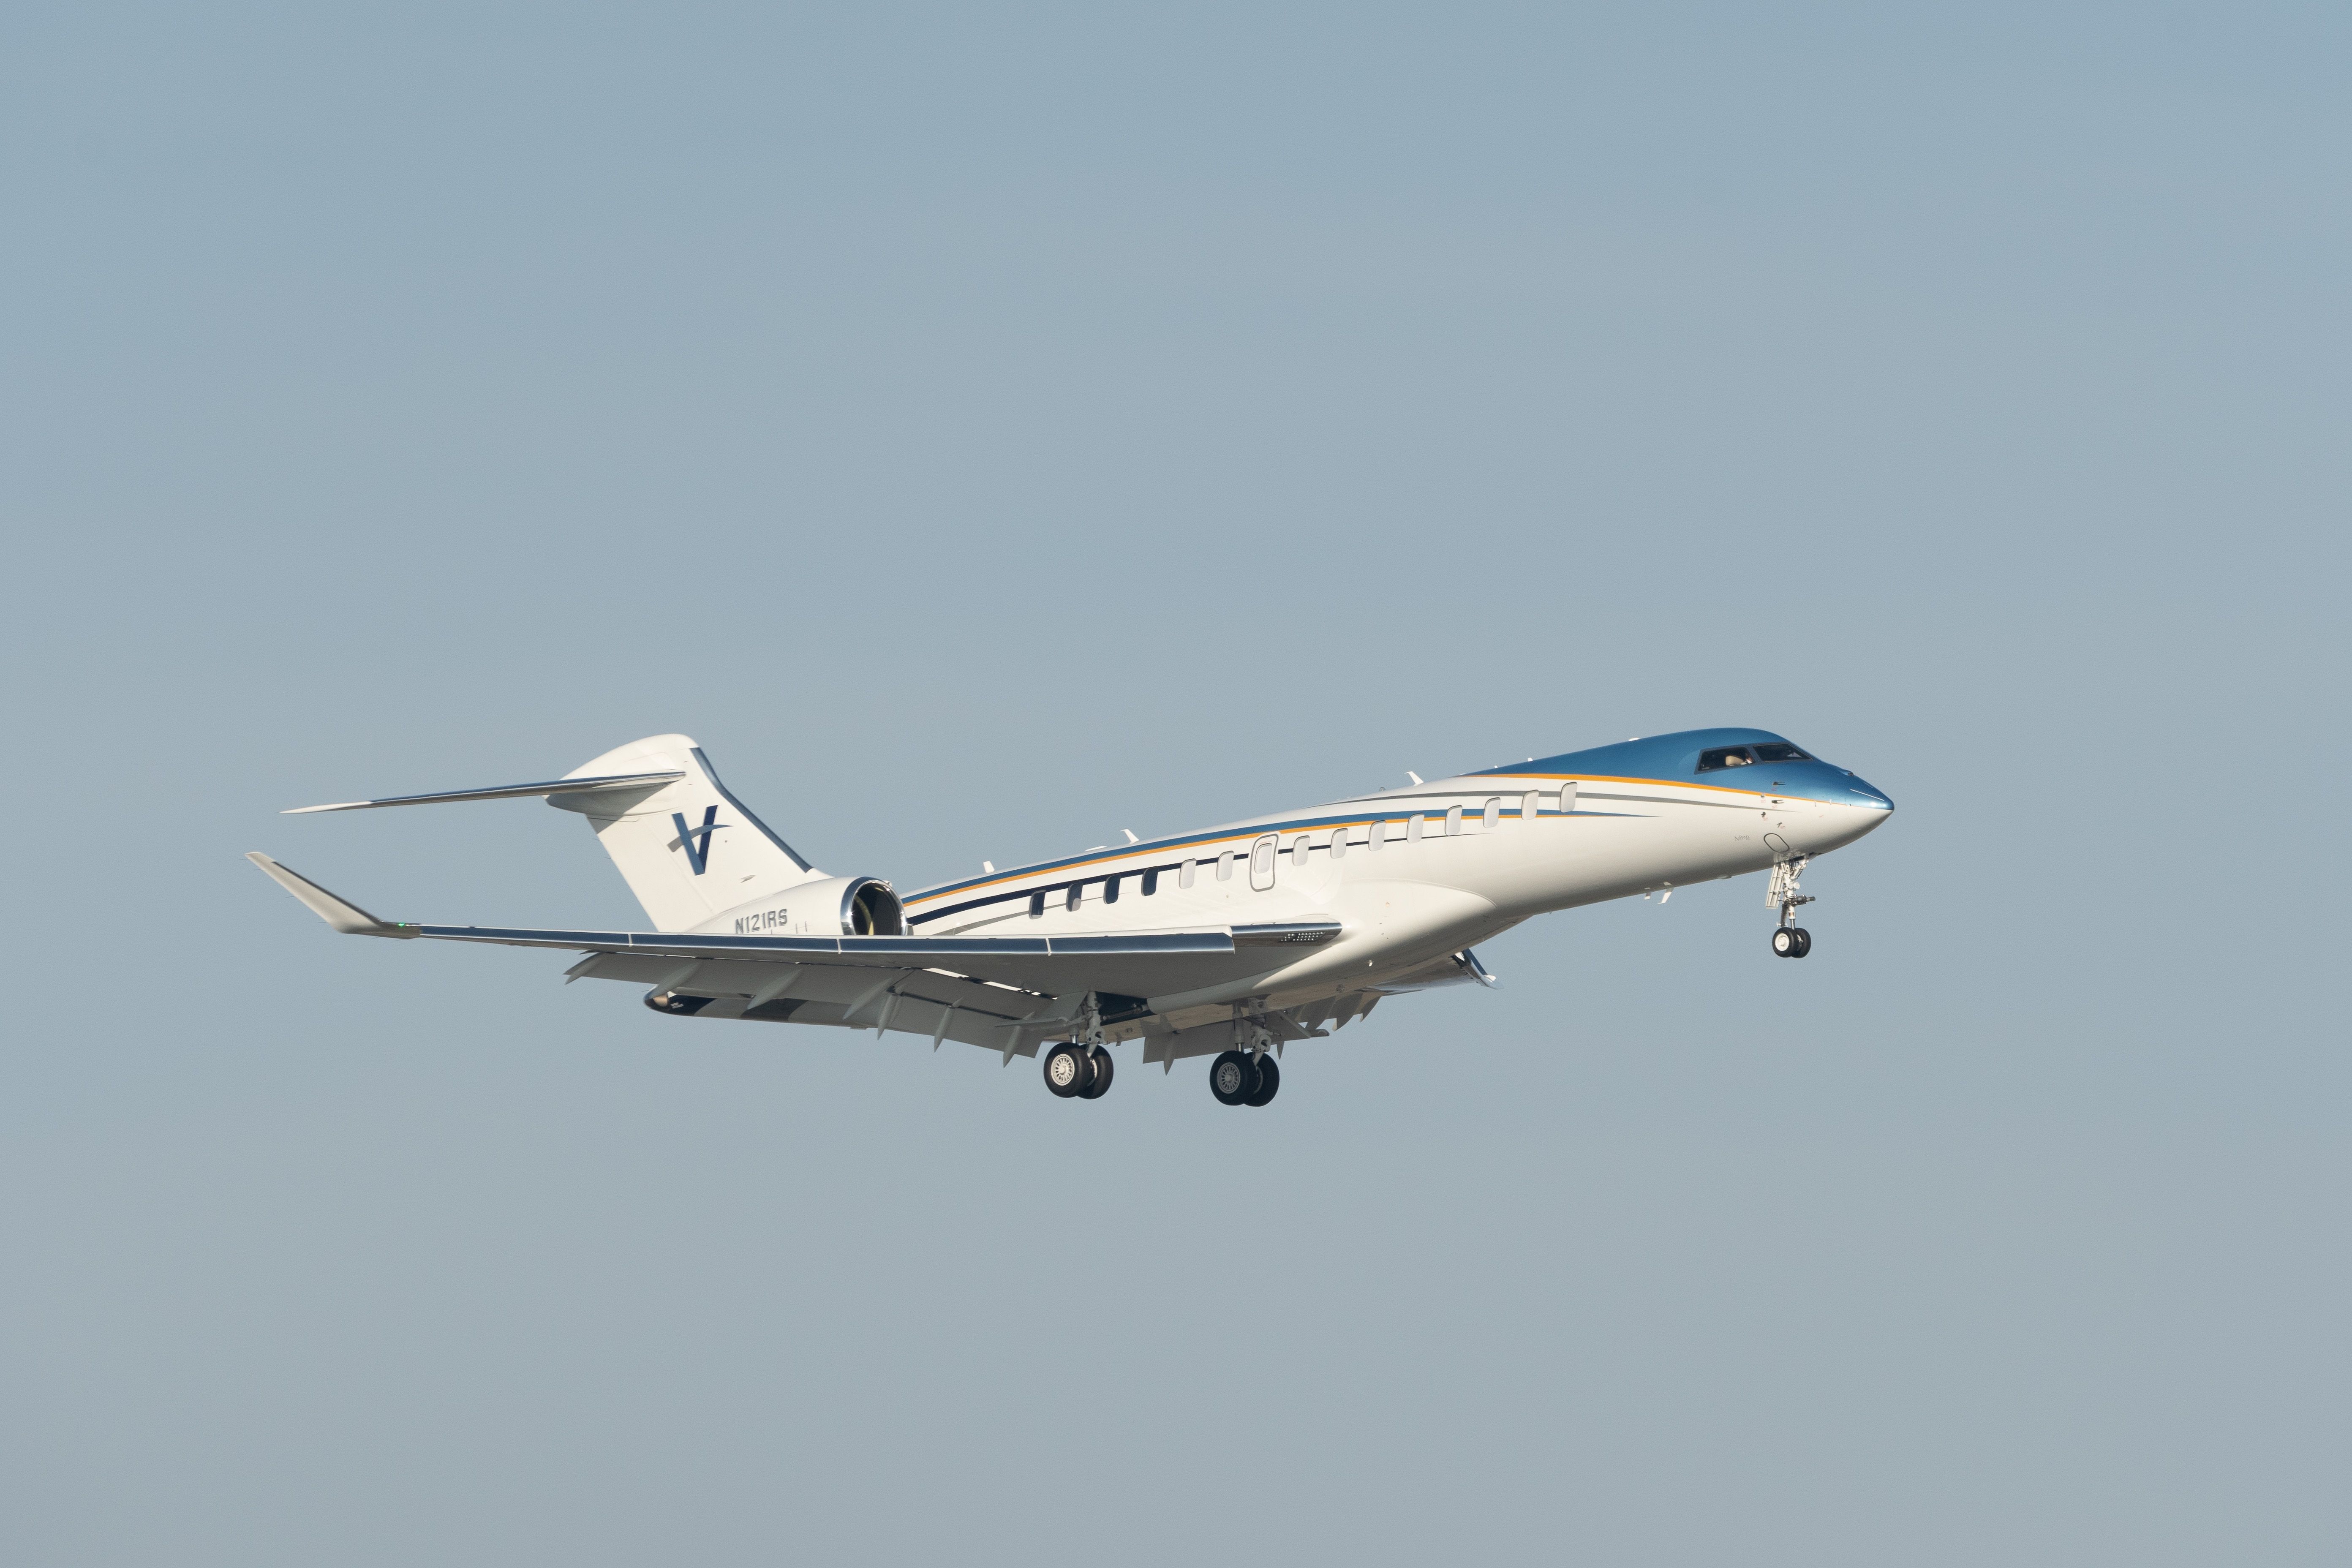 A Bombardier Global 7500 aircraft flying in the sky.